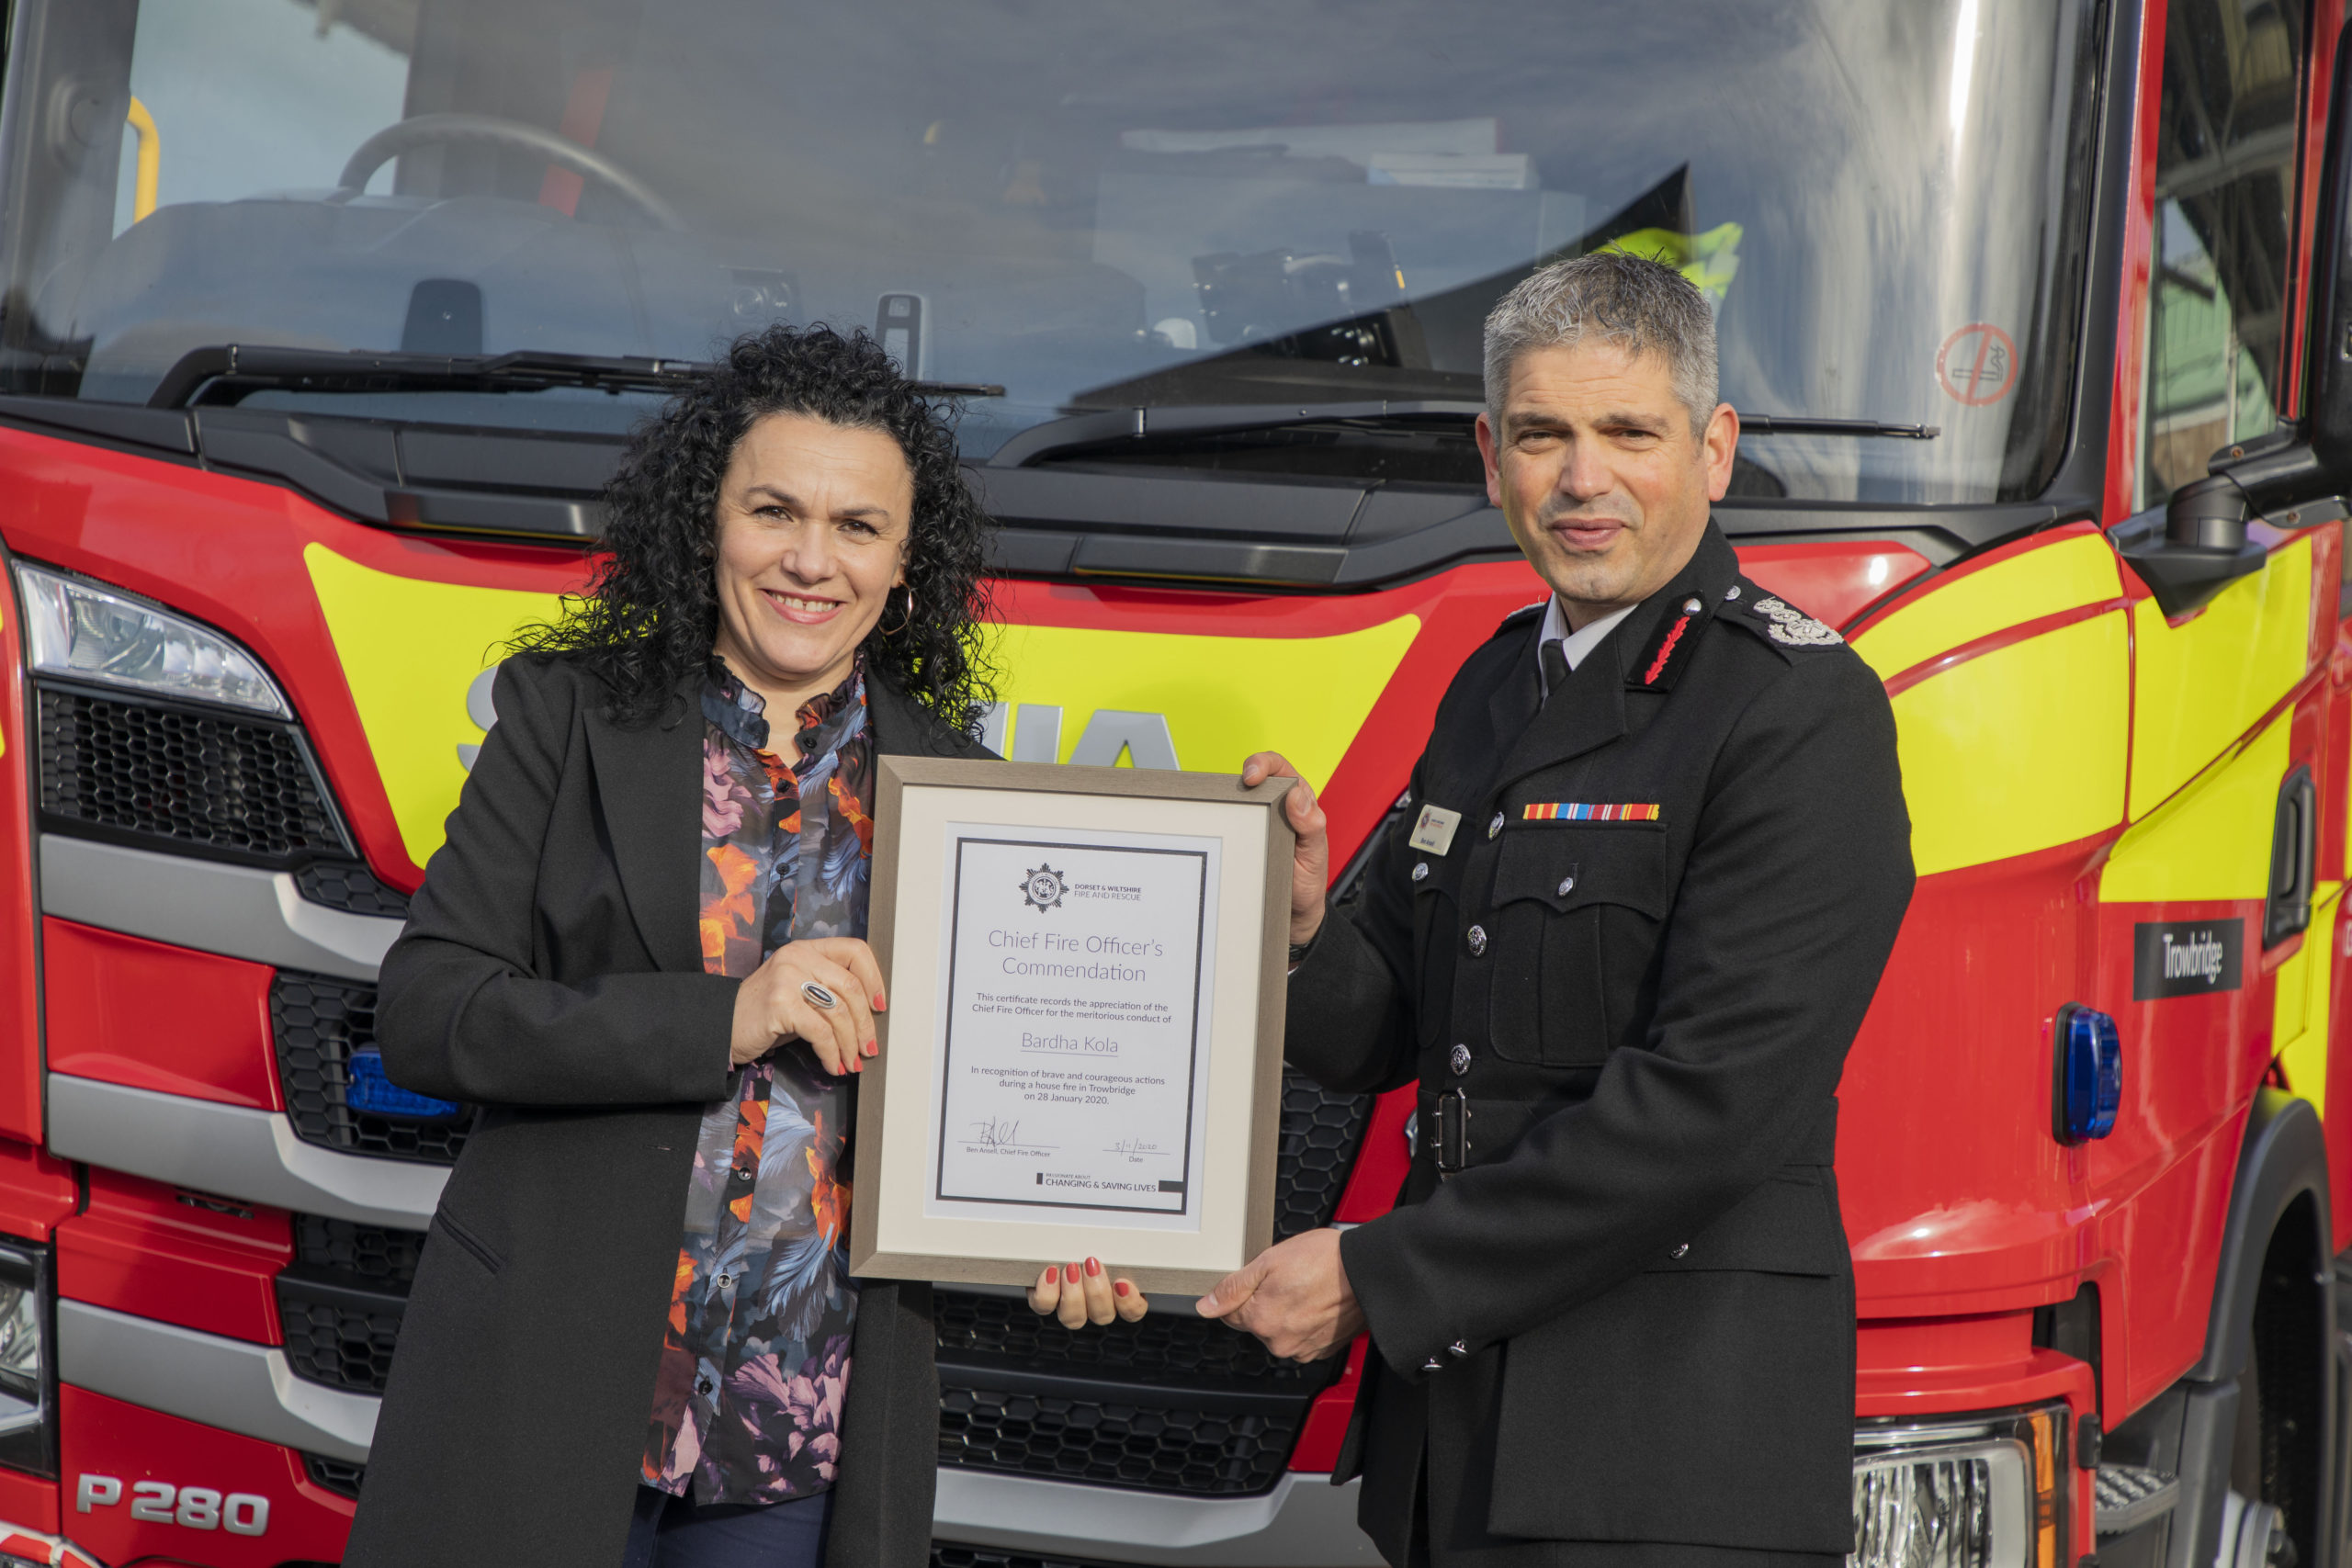 Chief fire officer presents commendation certificate